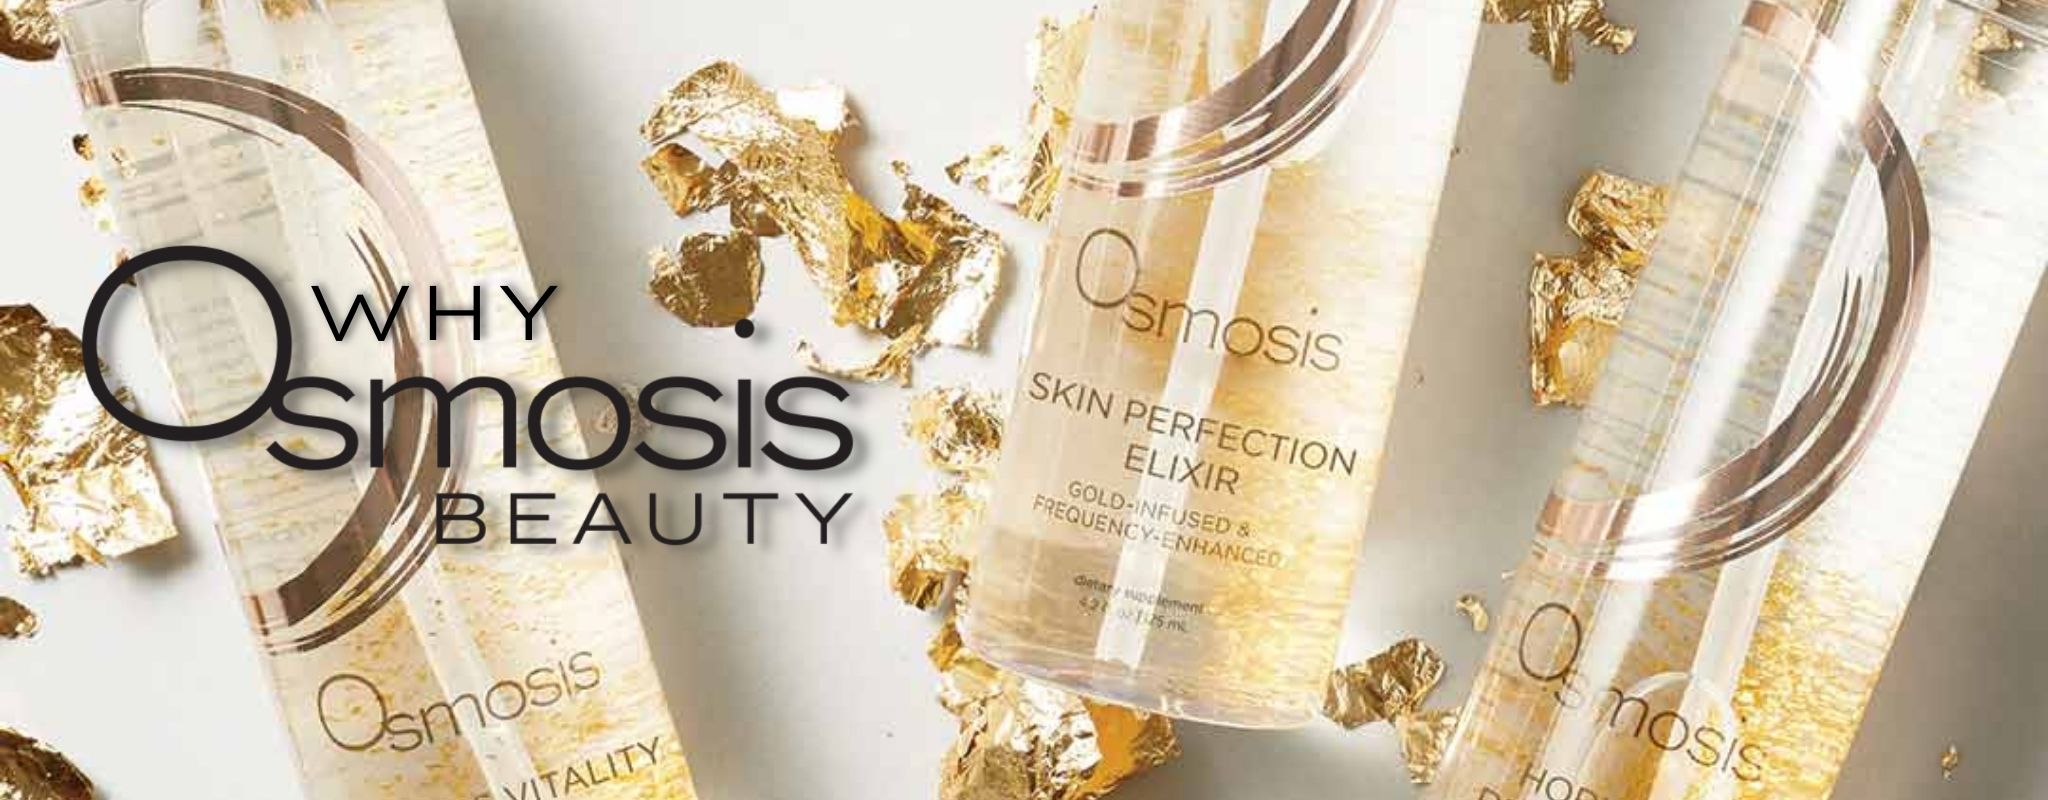 Load video: why choose osmosis beauty skincare video